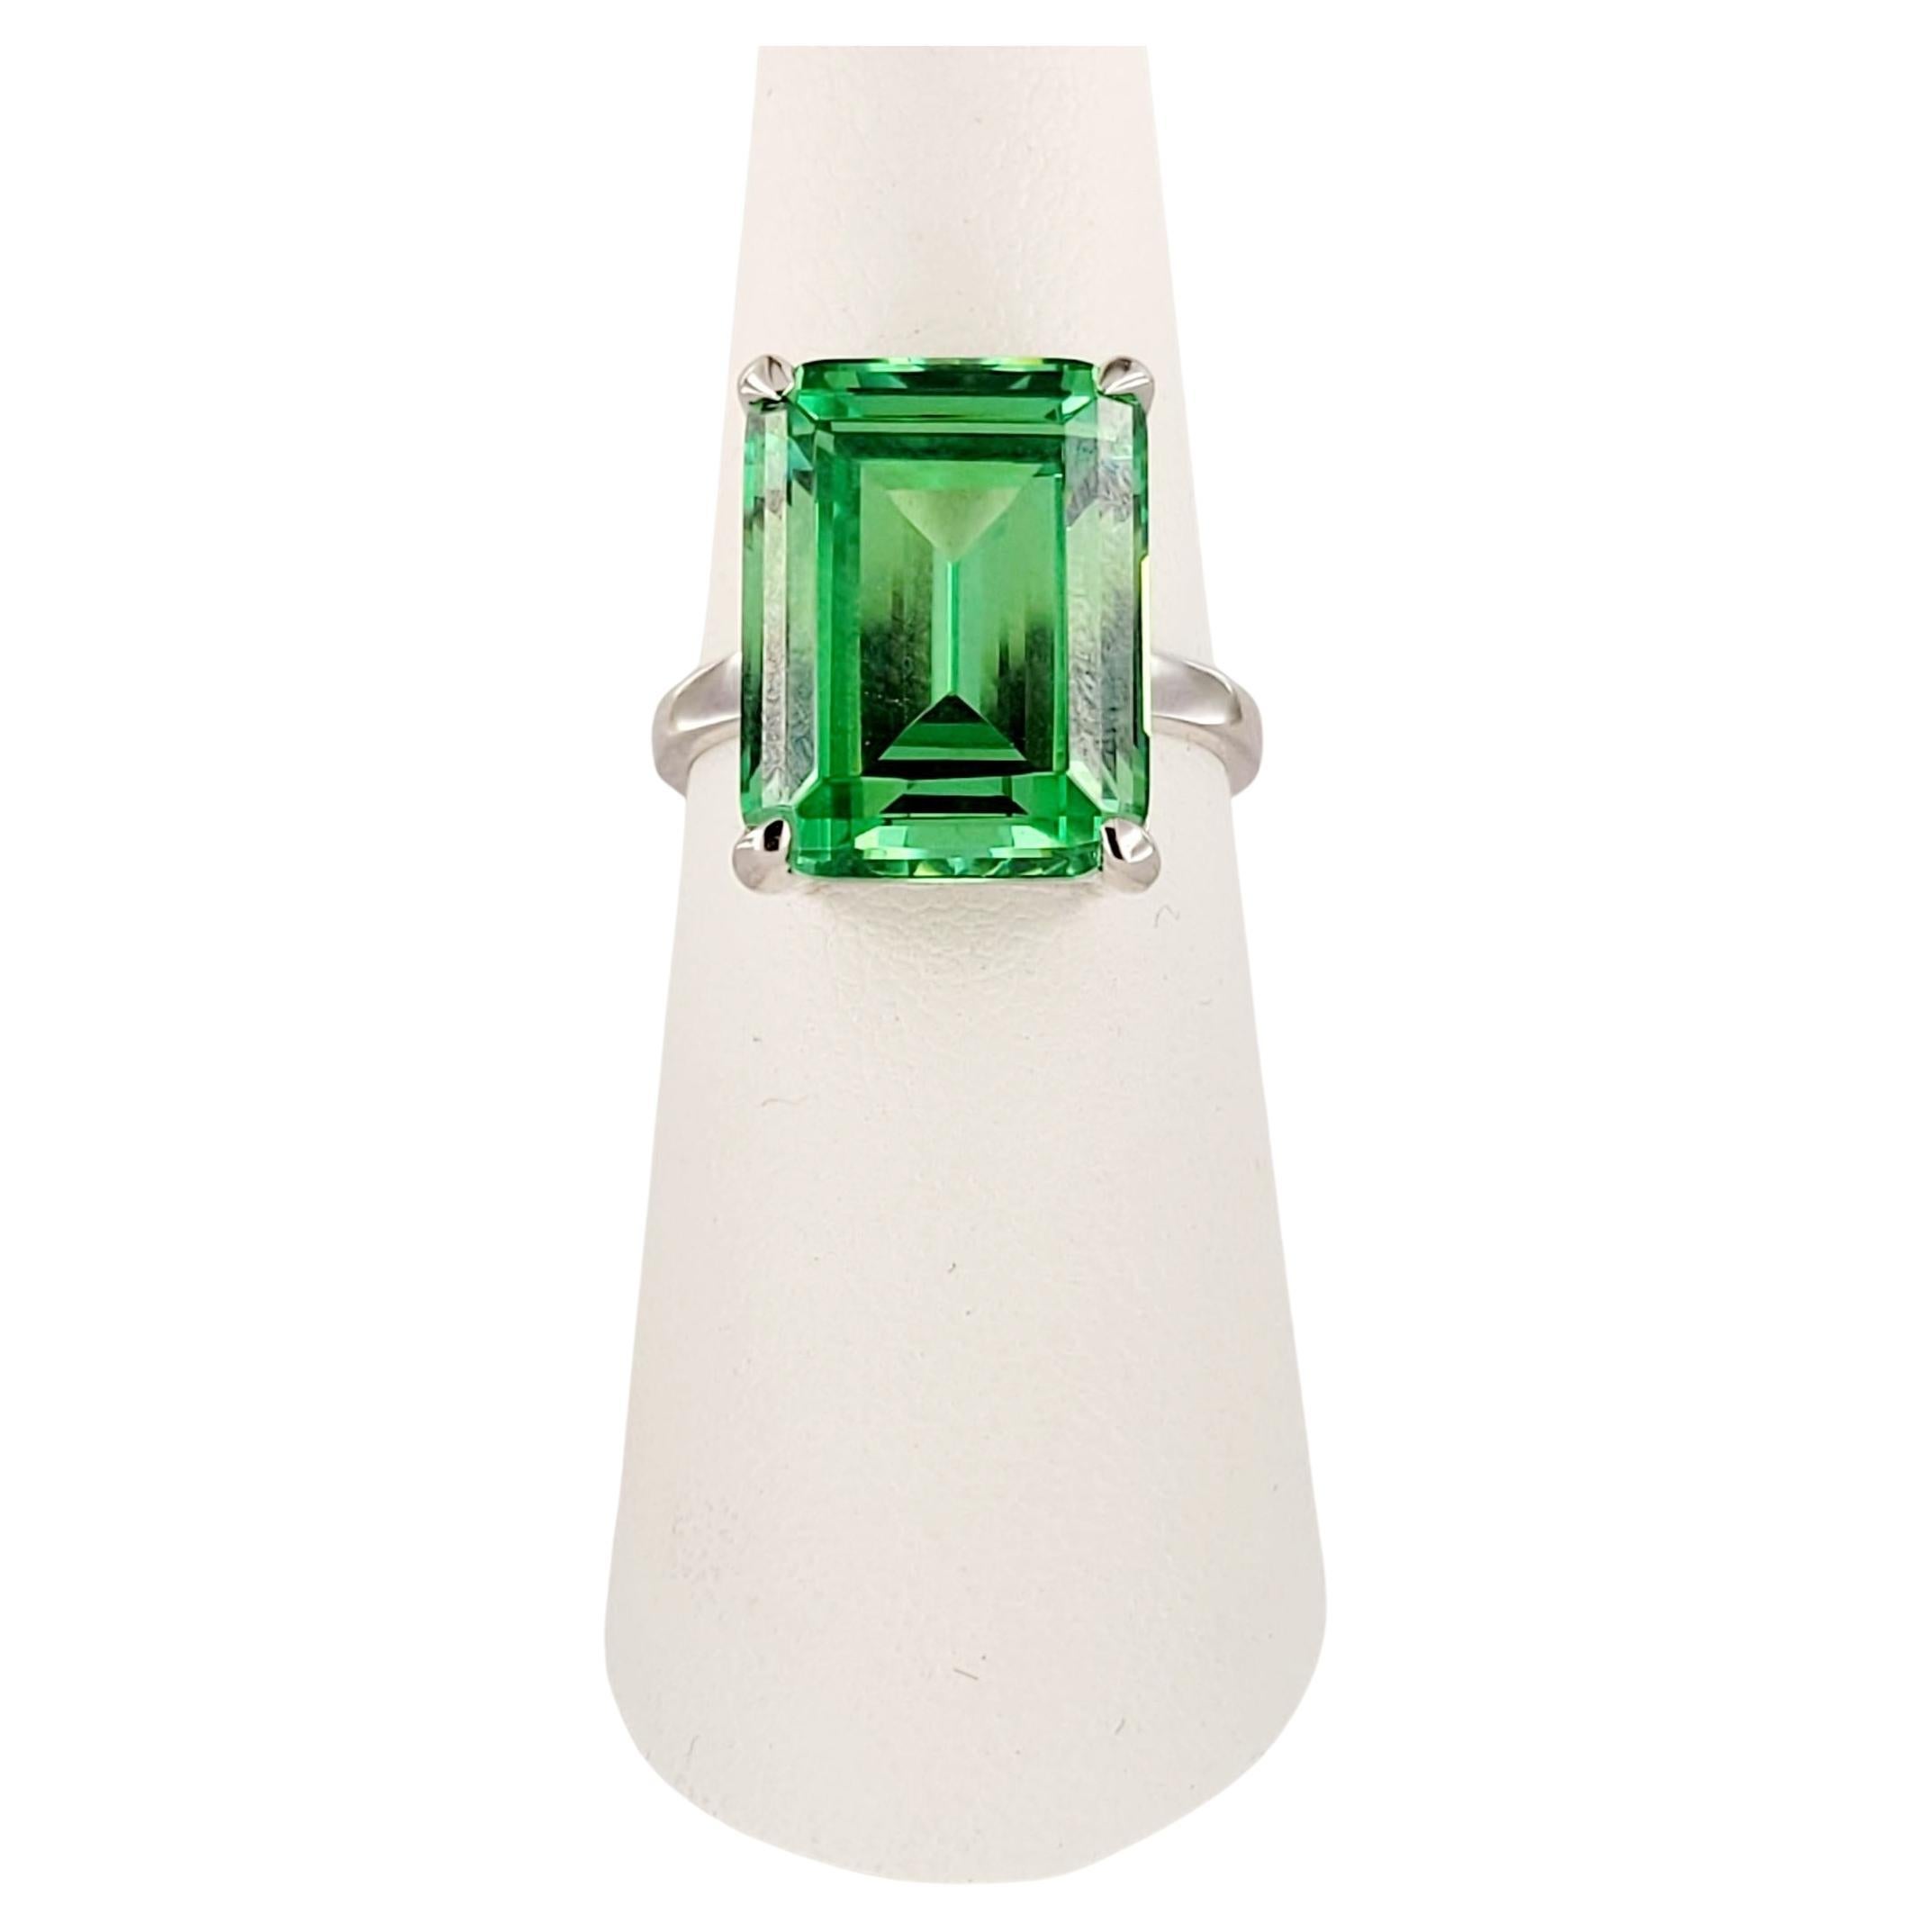 Tiffany & Co Green Quartz  Ring 
Material Sterling Silver 
Style Cocktail 
Quartz color Green
Quartz Dimension is 16 x 12 mm
Ring Size 6.75
Ring Weight 7 gr
Hallmarks: Tiffany & Co AG925
Condition New, never worn 
Tiffany & Co  Pouch is included